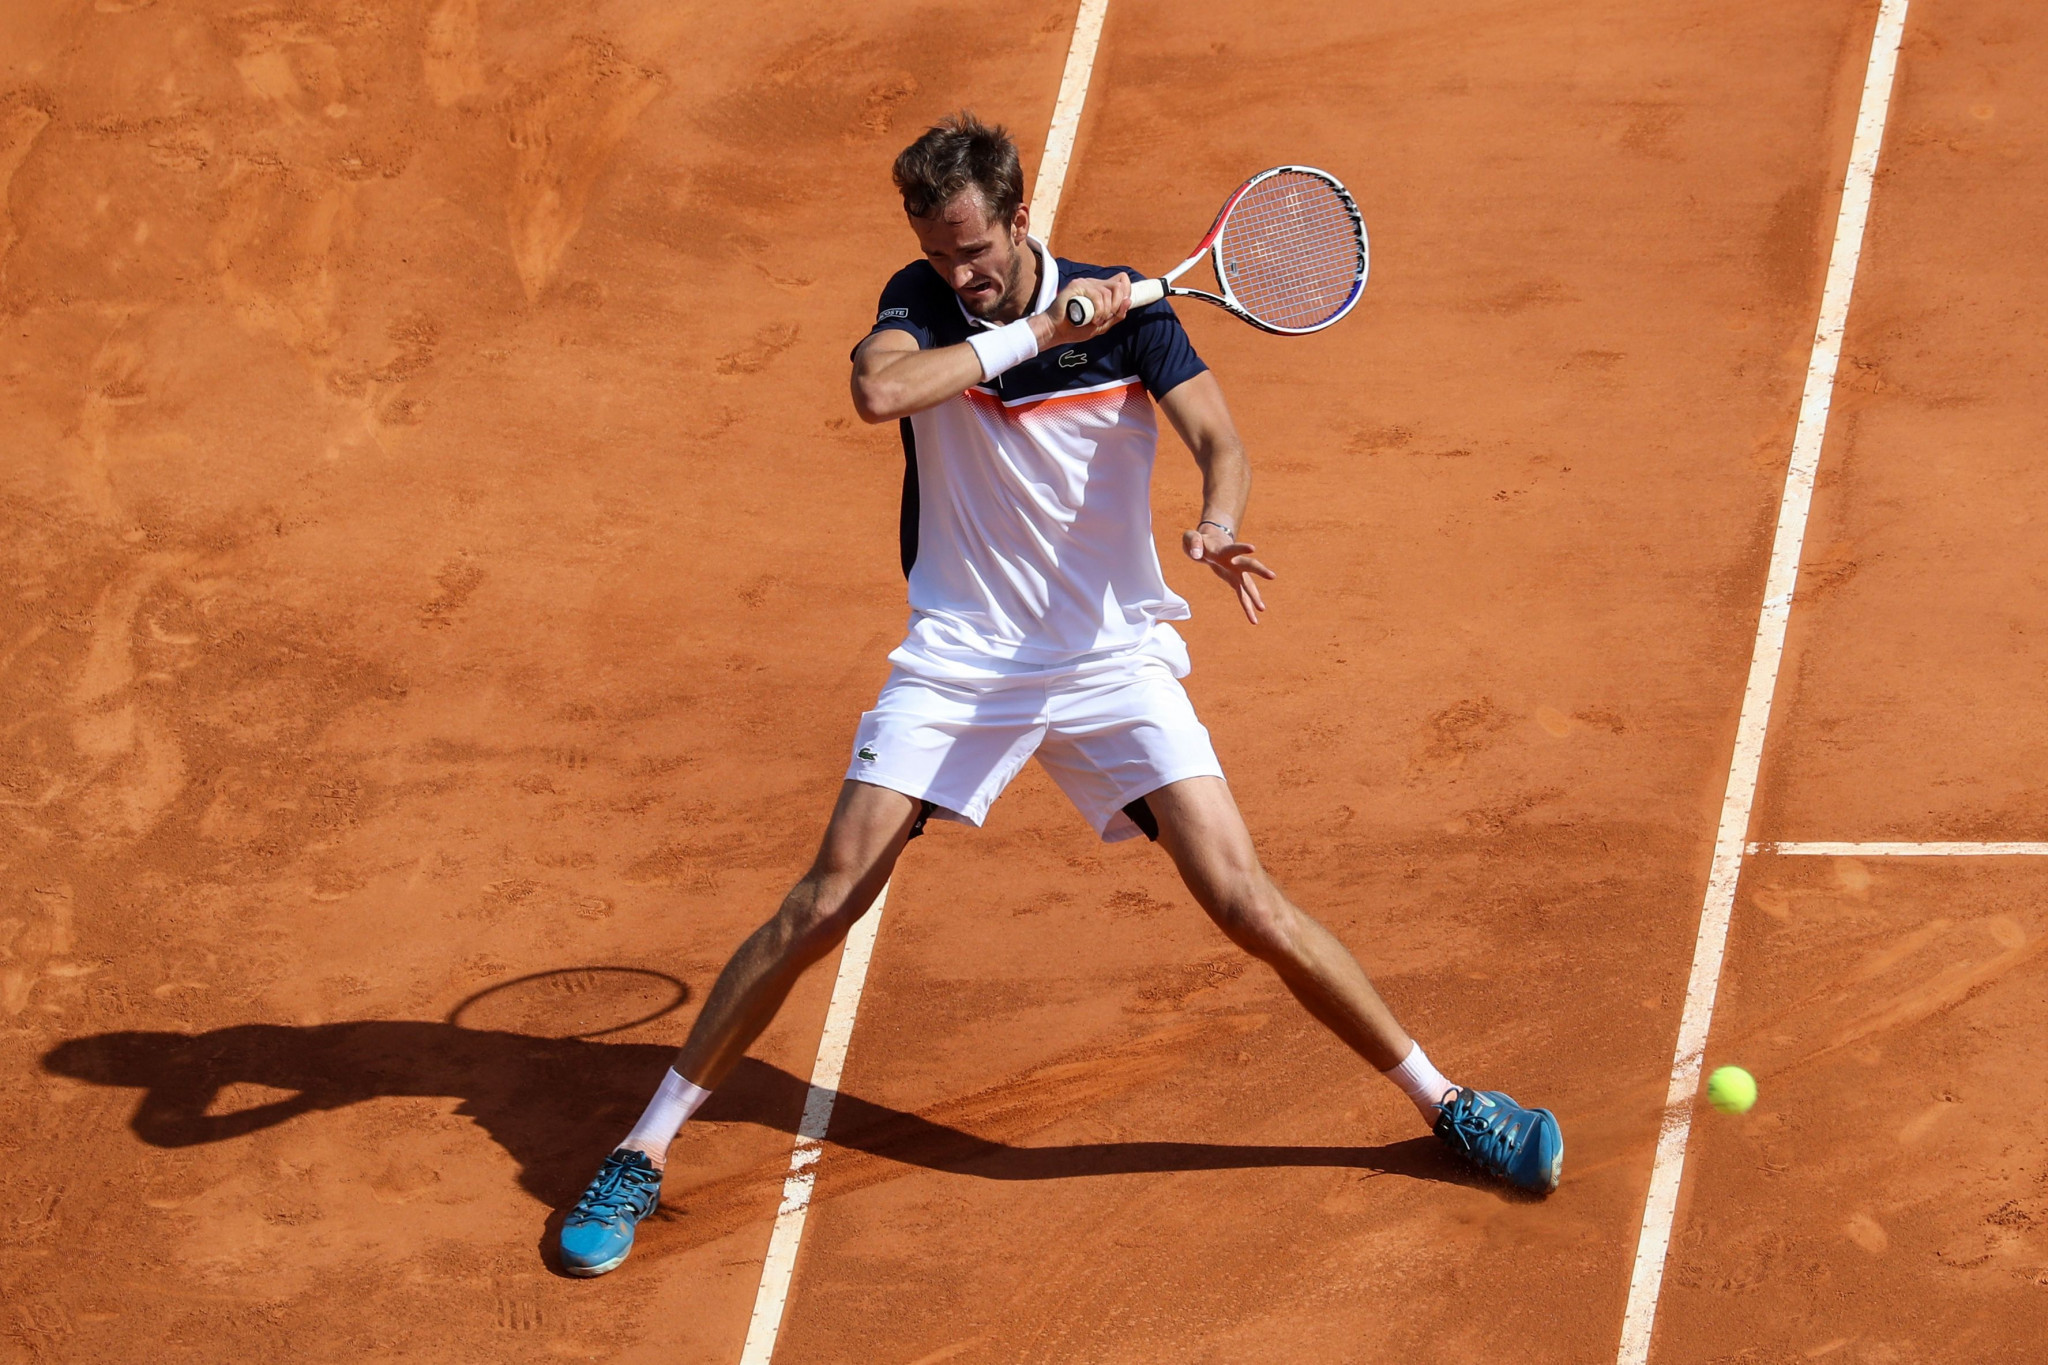 Russia's Daniil Medvedev reached his first ATP Masters 1000 semi-final in Monte-Carlo ©Getty Images